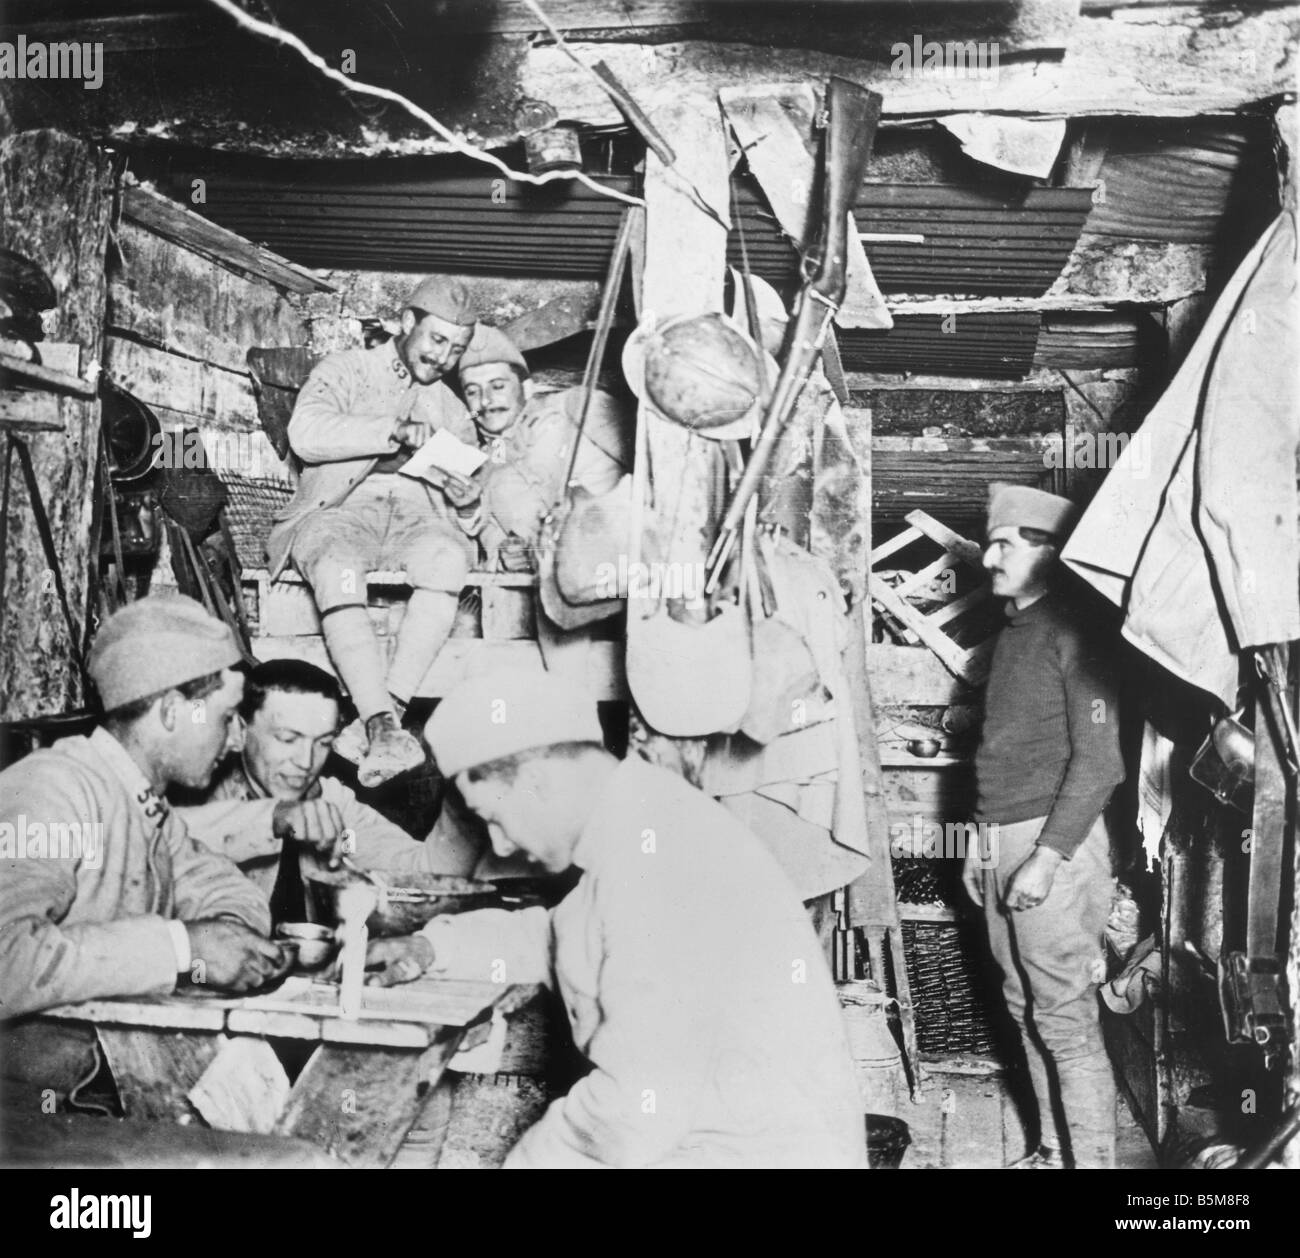 2 G55 F1 1917 13 E WW1 French soldiers in a trench History World War One France French soldiers in their lodgings in a trench Ph Stock Photo